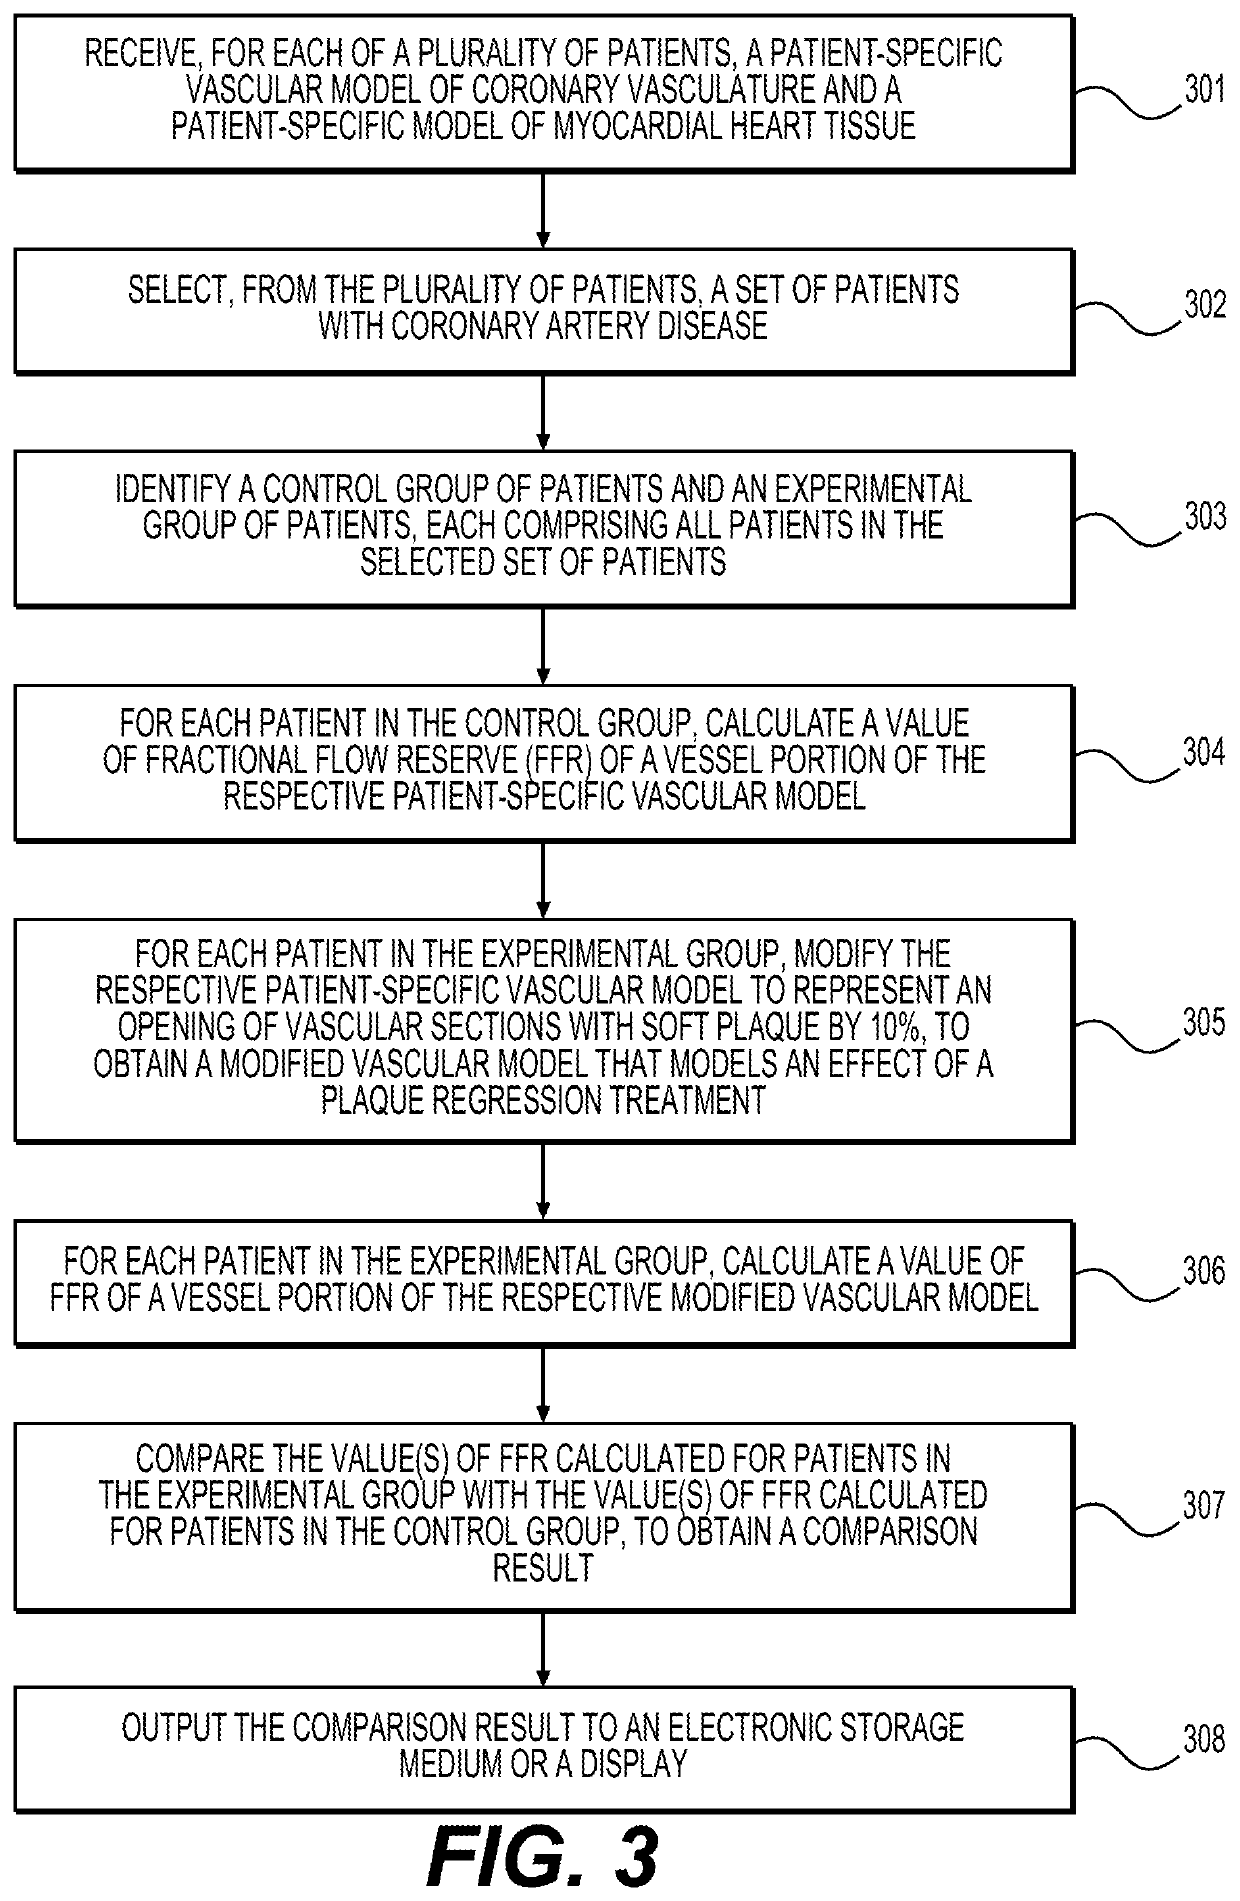 Systems and methods for performing computer-simulated evaluation of treatments on a target population